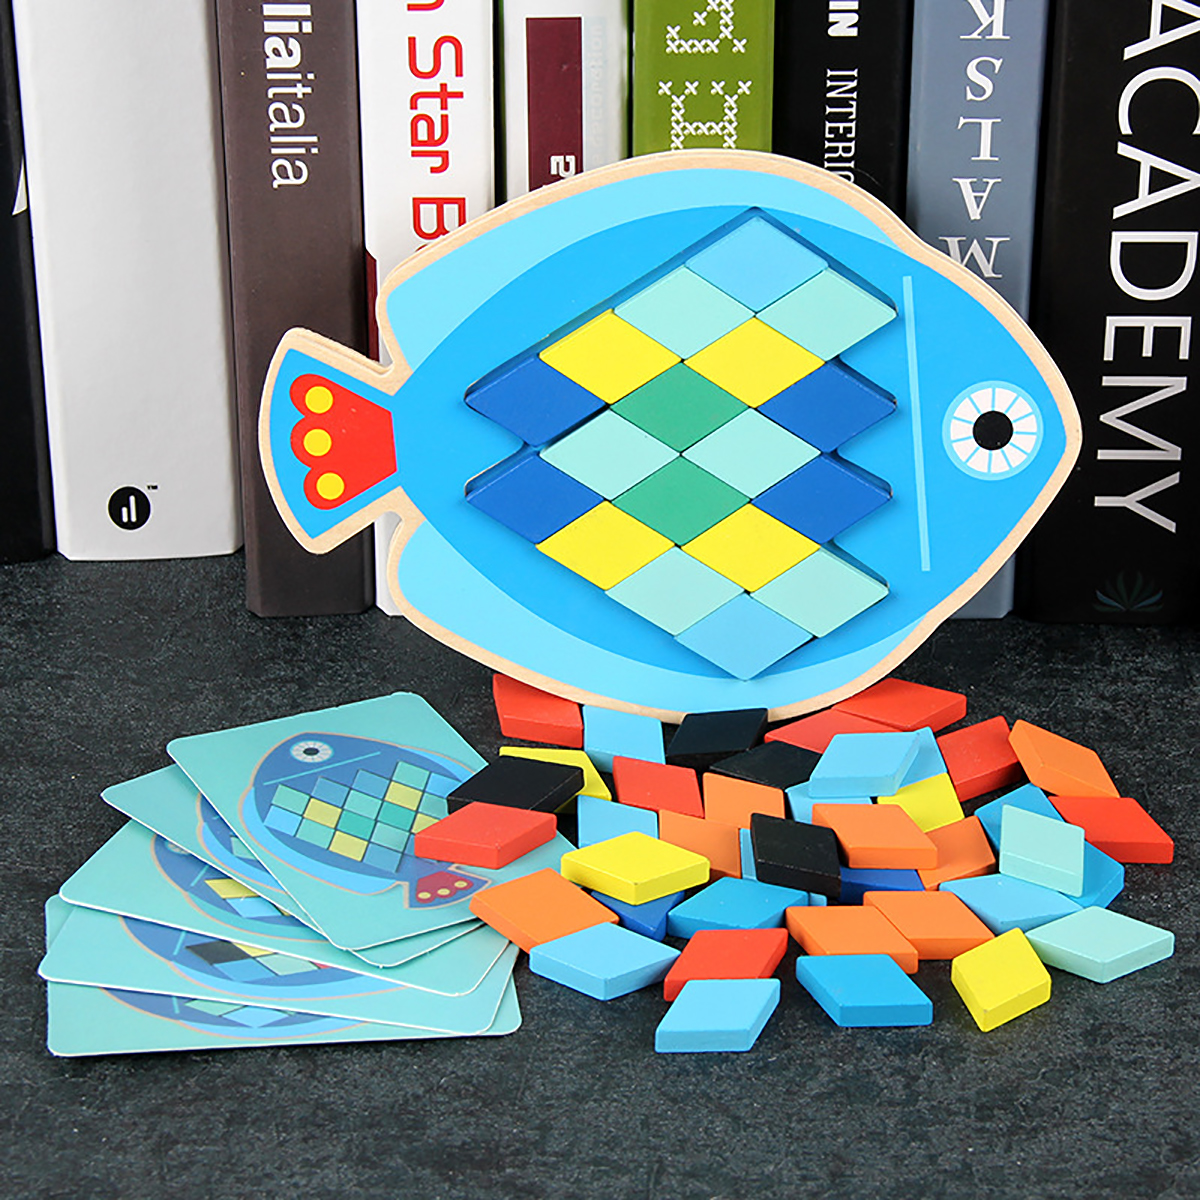 Wood DIY Assembly Jigsaw Puzzle Toy Colors Shapes Cartoon Fish Owl Matching Cards Toy for Children Learning - Photo: 6